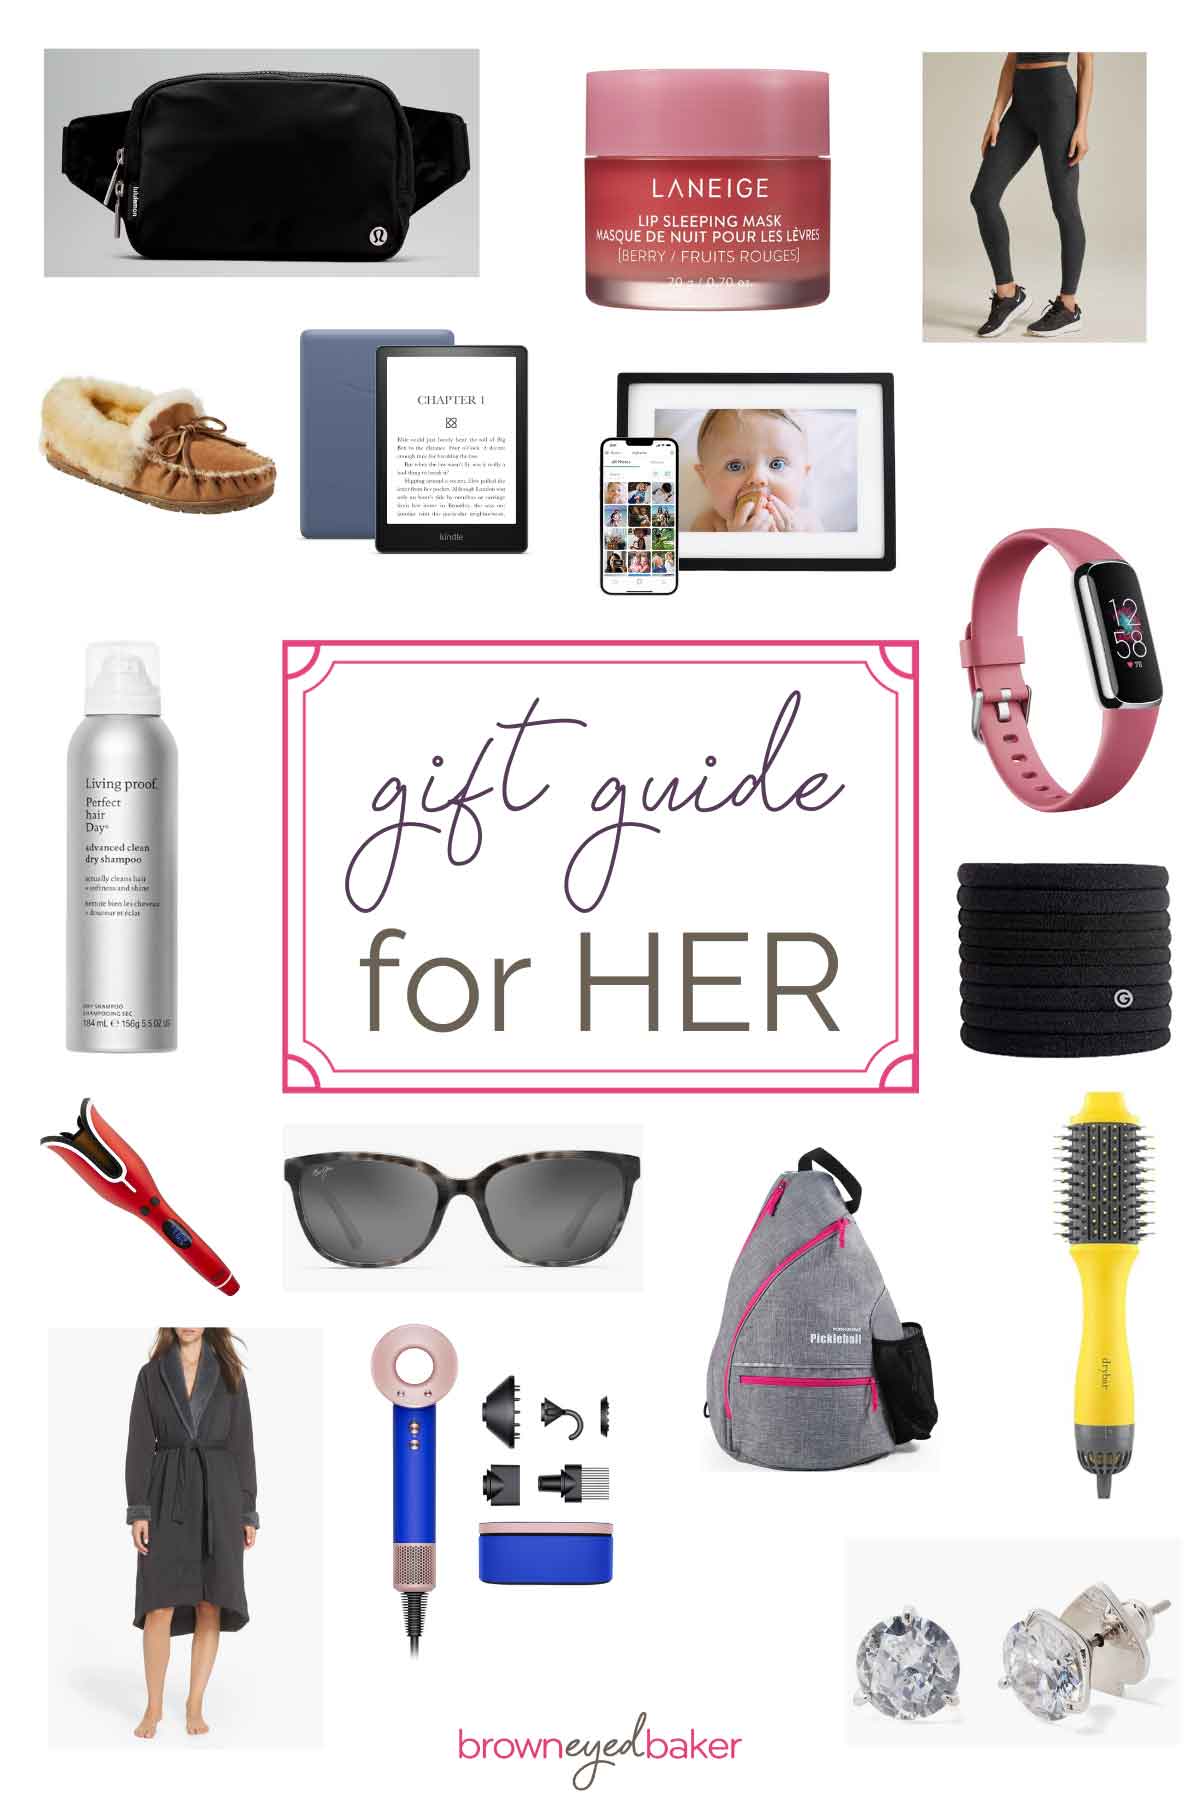 Photo collage of different products with text in center "gift guide for her".